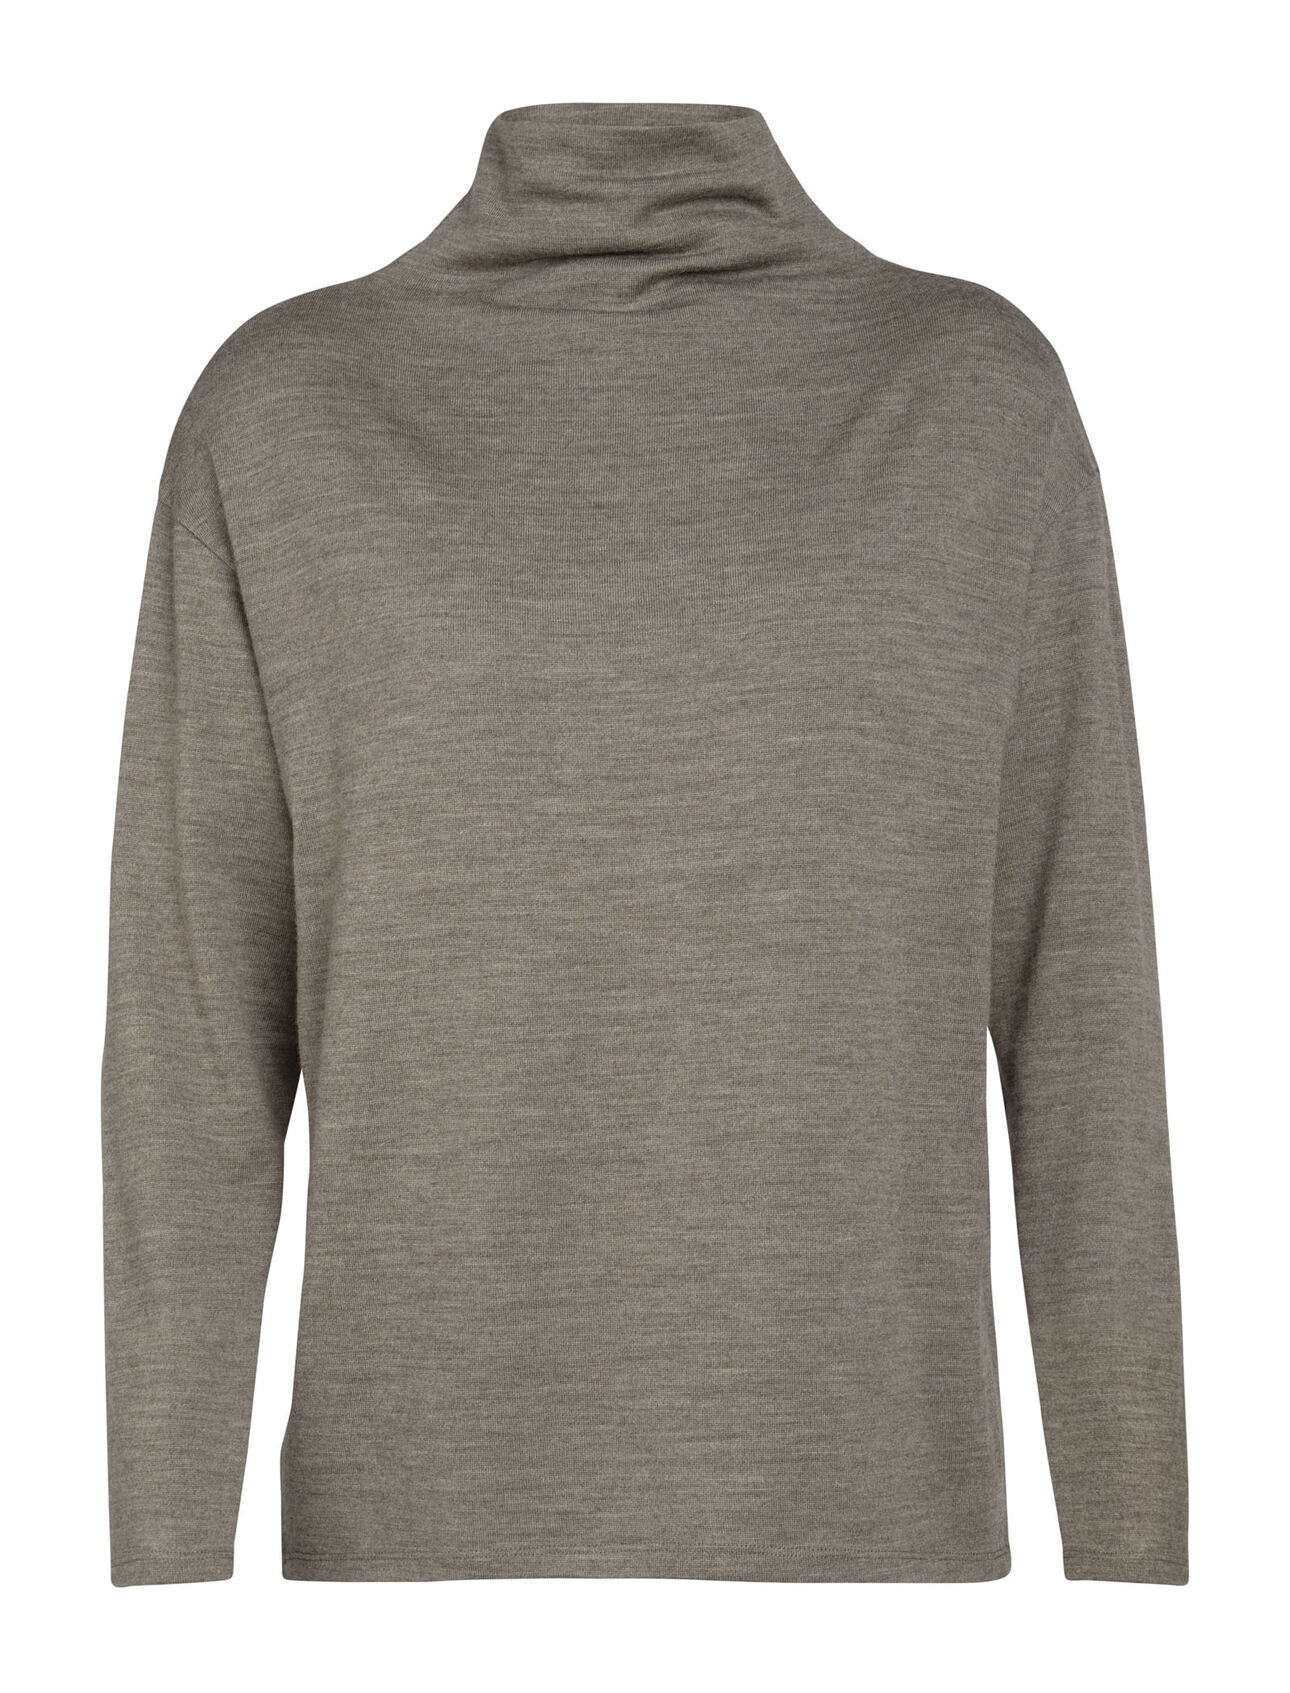 Womens Merino Deice Long Sleeve Turtleneck Sweater  A modern top with a loose mock-neck design and our 100% merino jersey fabric, the Deice Long Sleeve Turtleneck is versatile, lightweight, and incredibly comfortable.